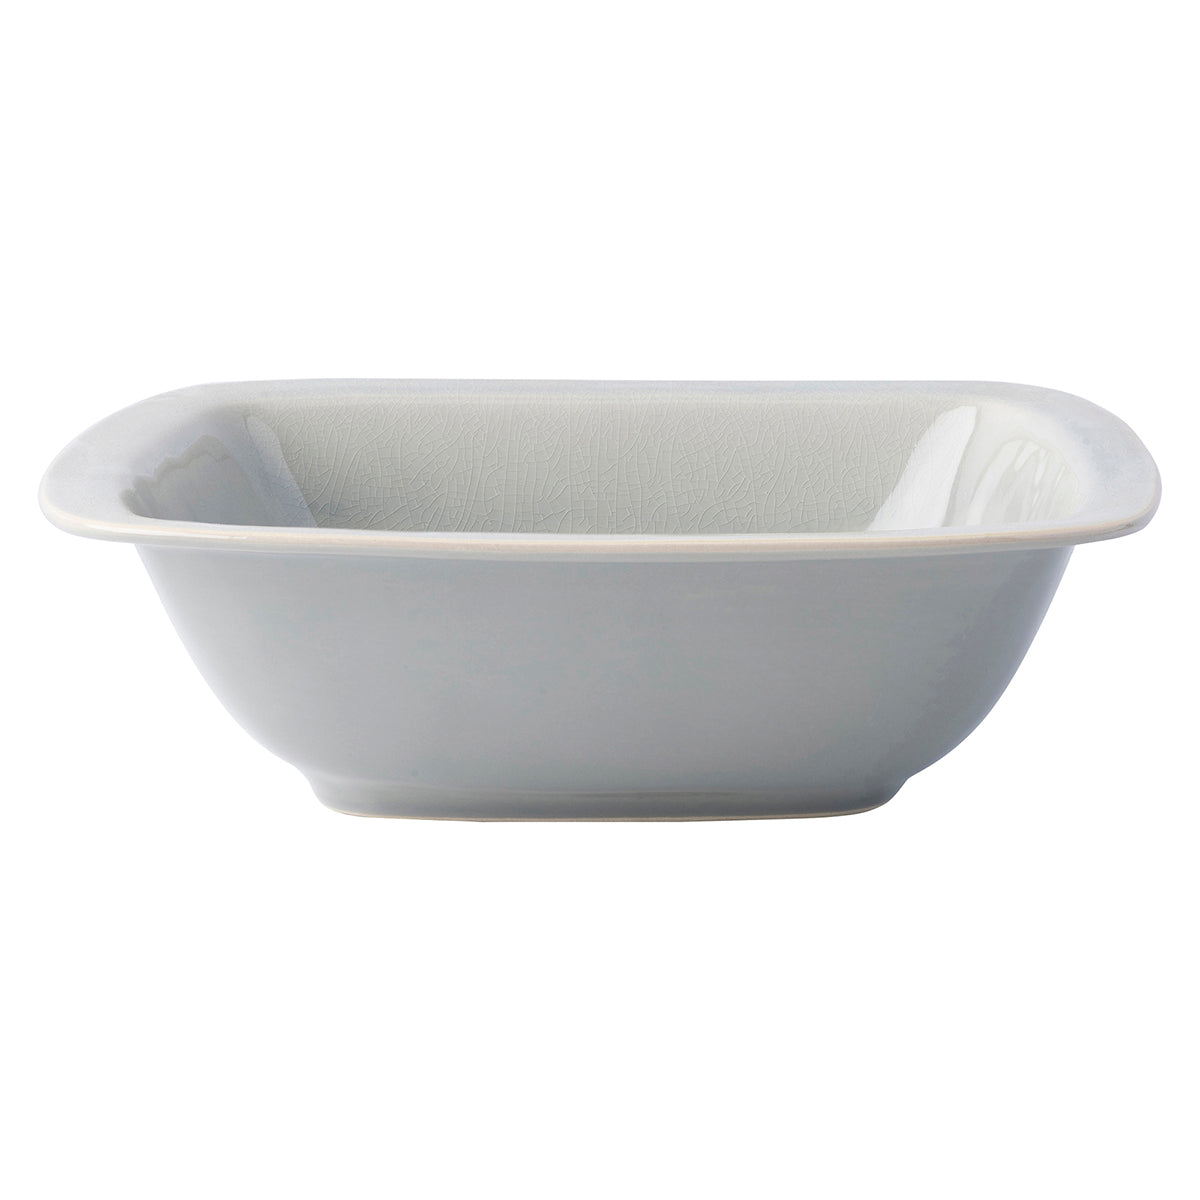 Puro Grey Mist Medium Rounded Square Serving Bowl-2nd